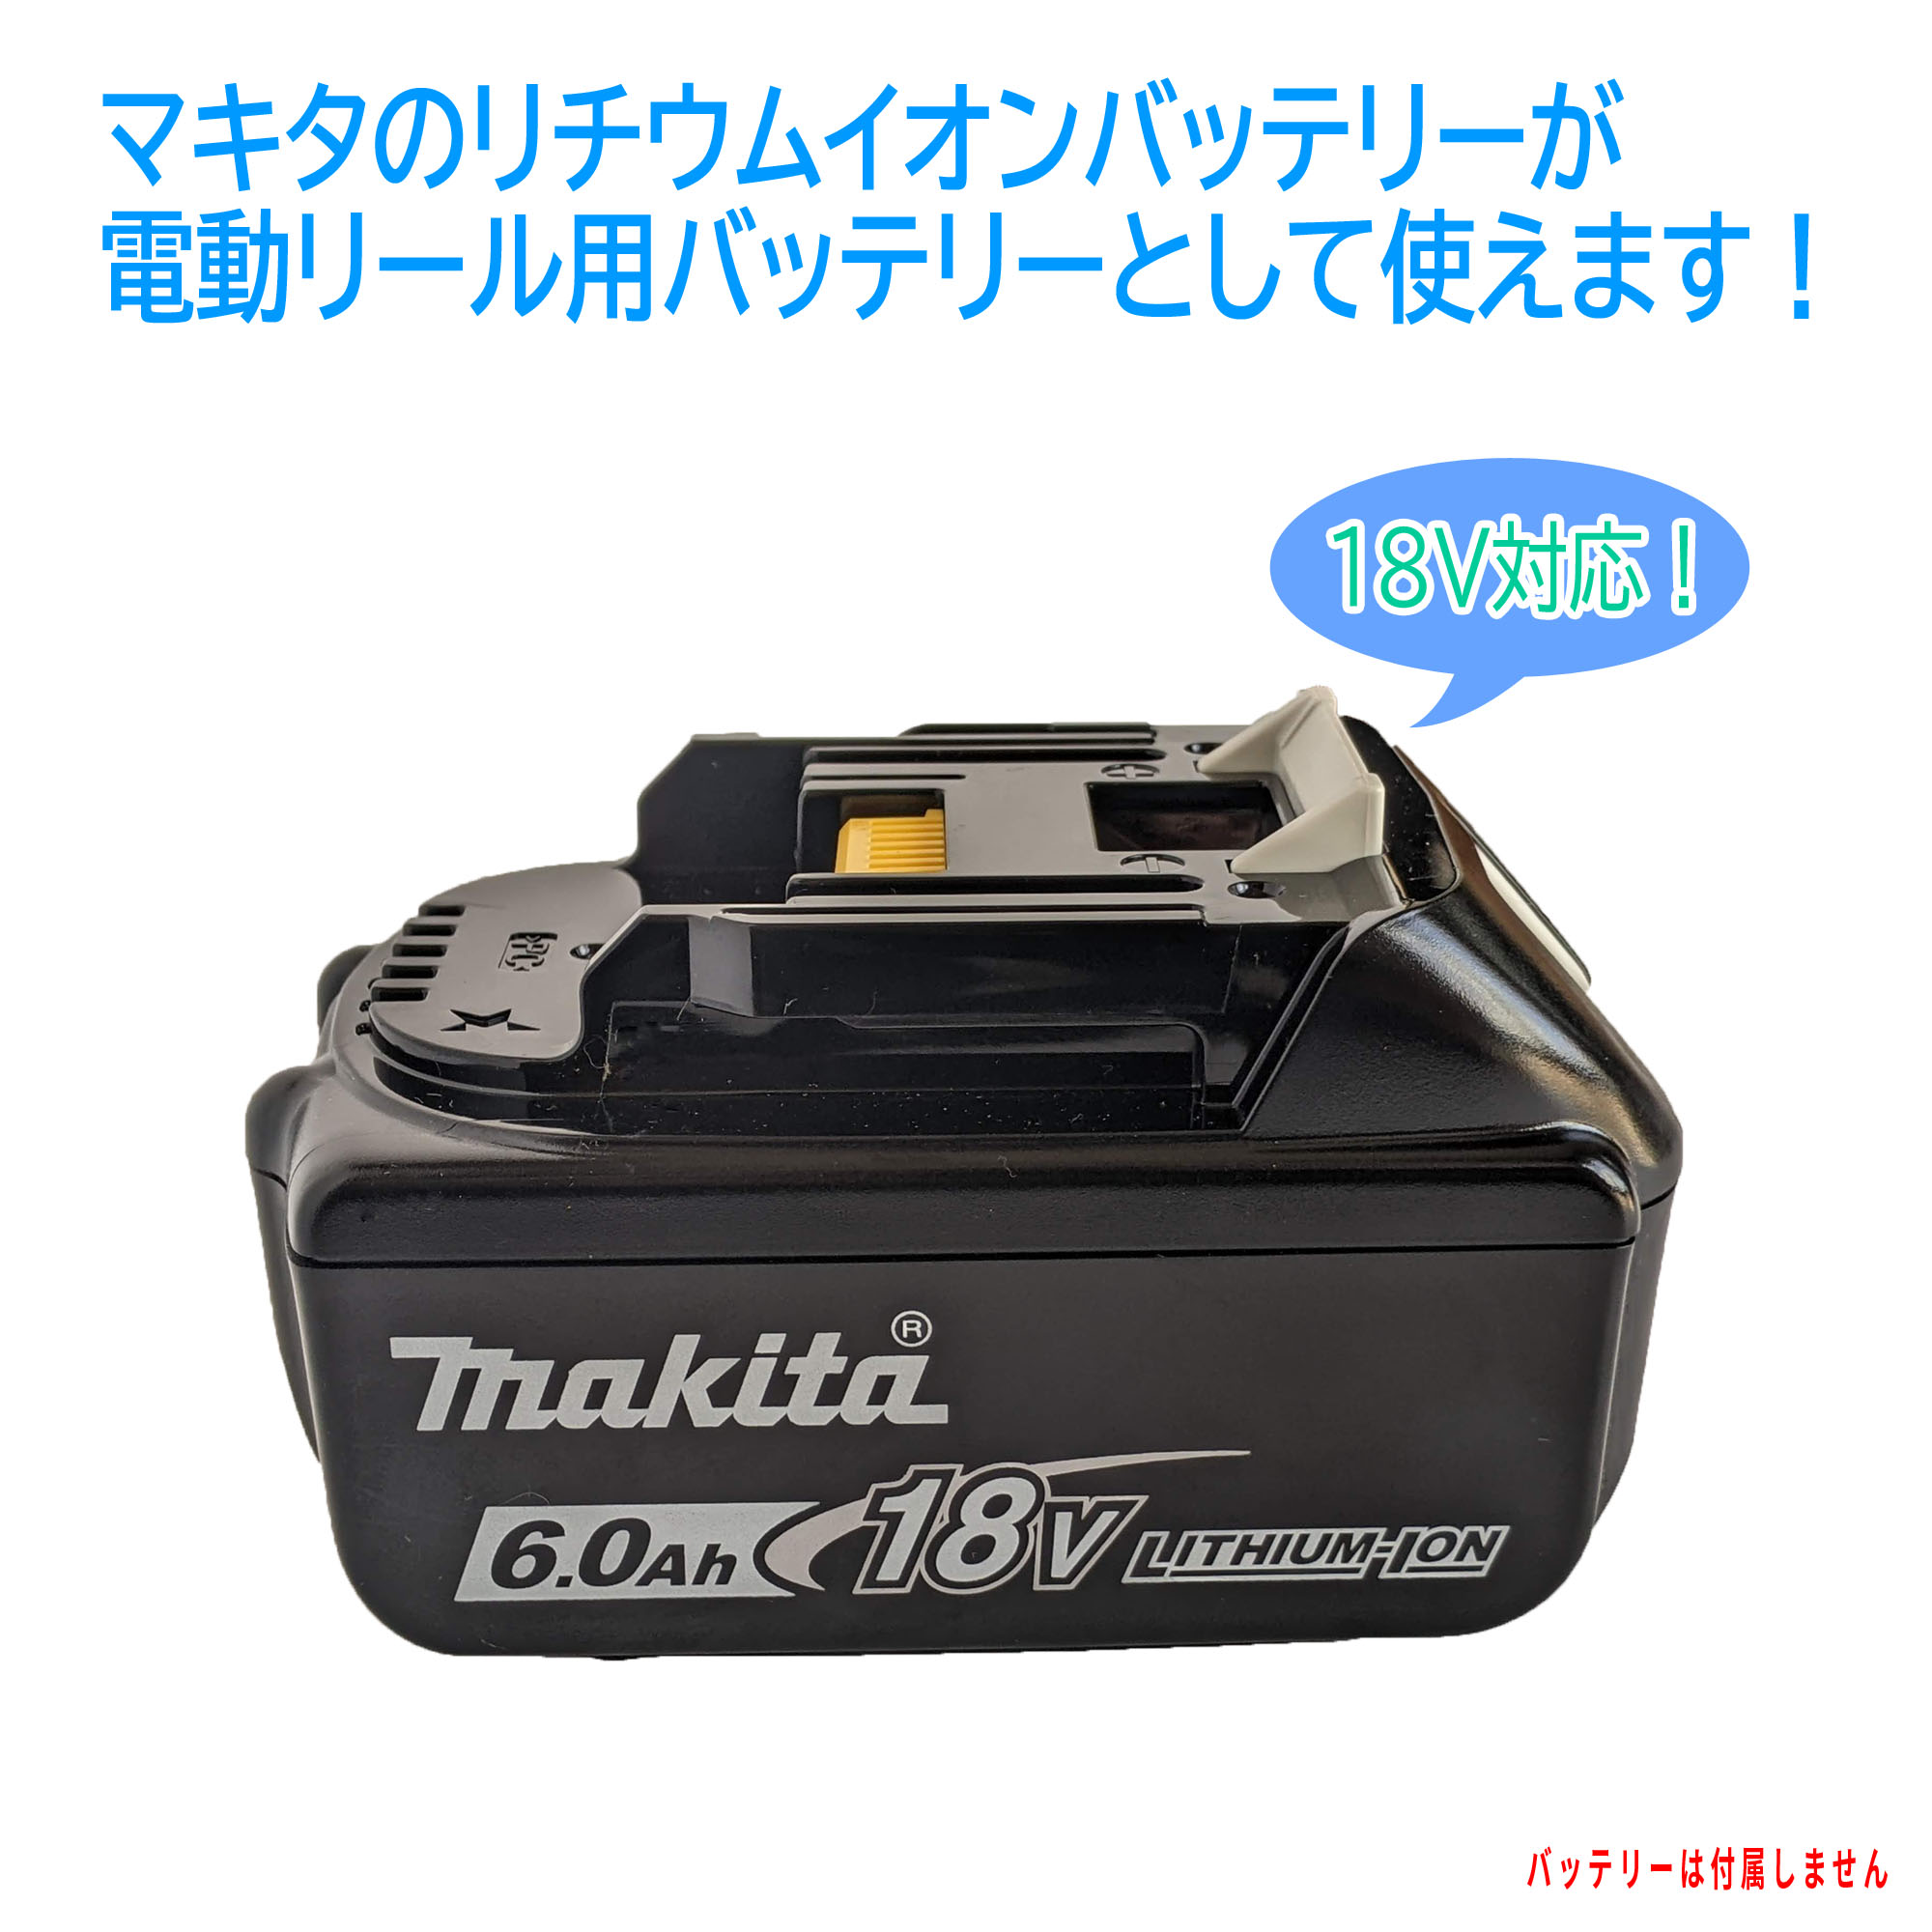 Blue Purple electric reel for Makita lithium ion battery waterproof case (18V correspondence ) [ maximum 25A specification ]